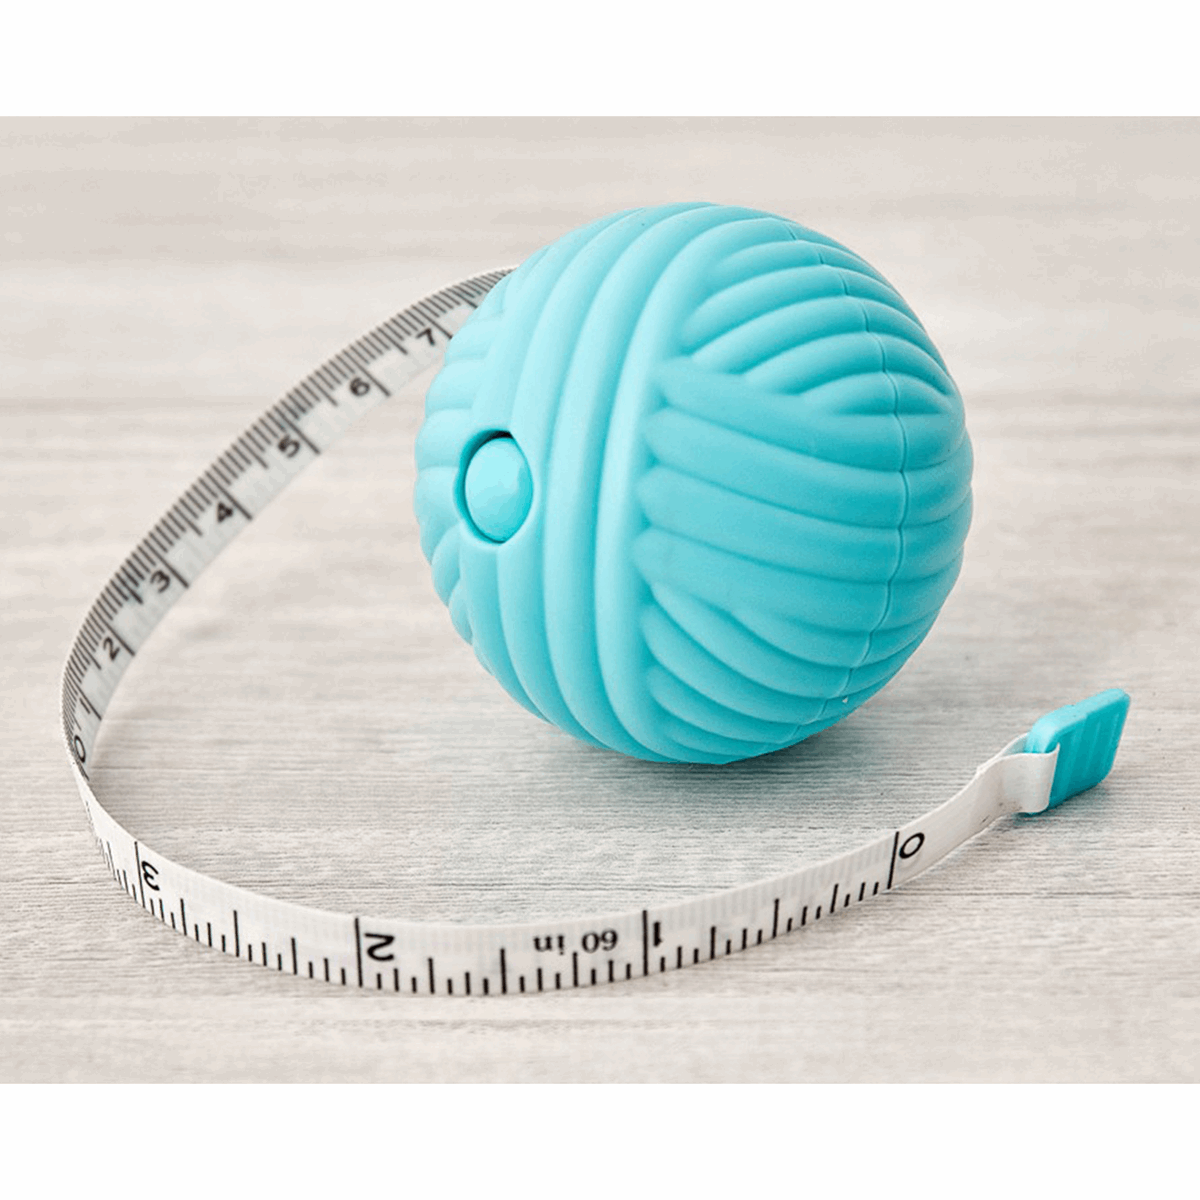 Square Leather Embossed Tape Measure Leather 1.5m 60 Measure Retractable  Tape Measure for Sewing, Knitting, Crocheting, Quilting 